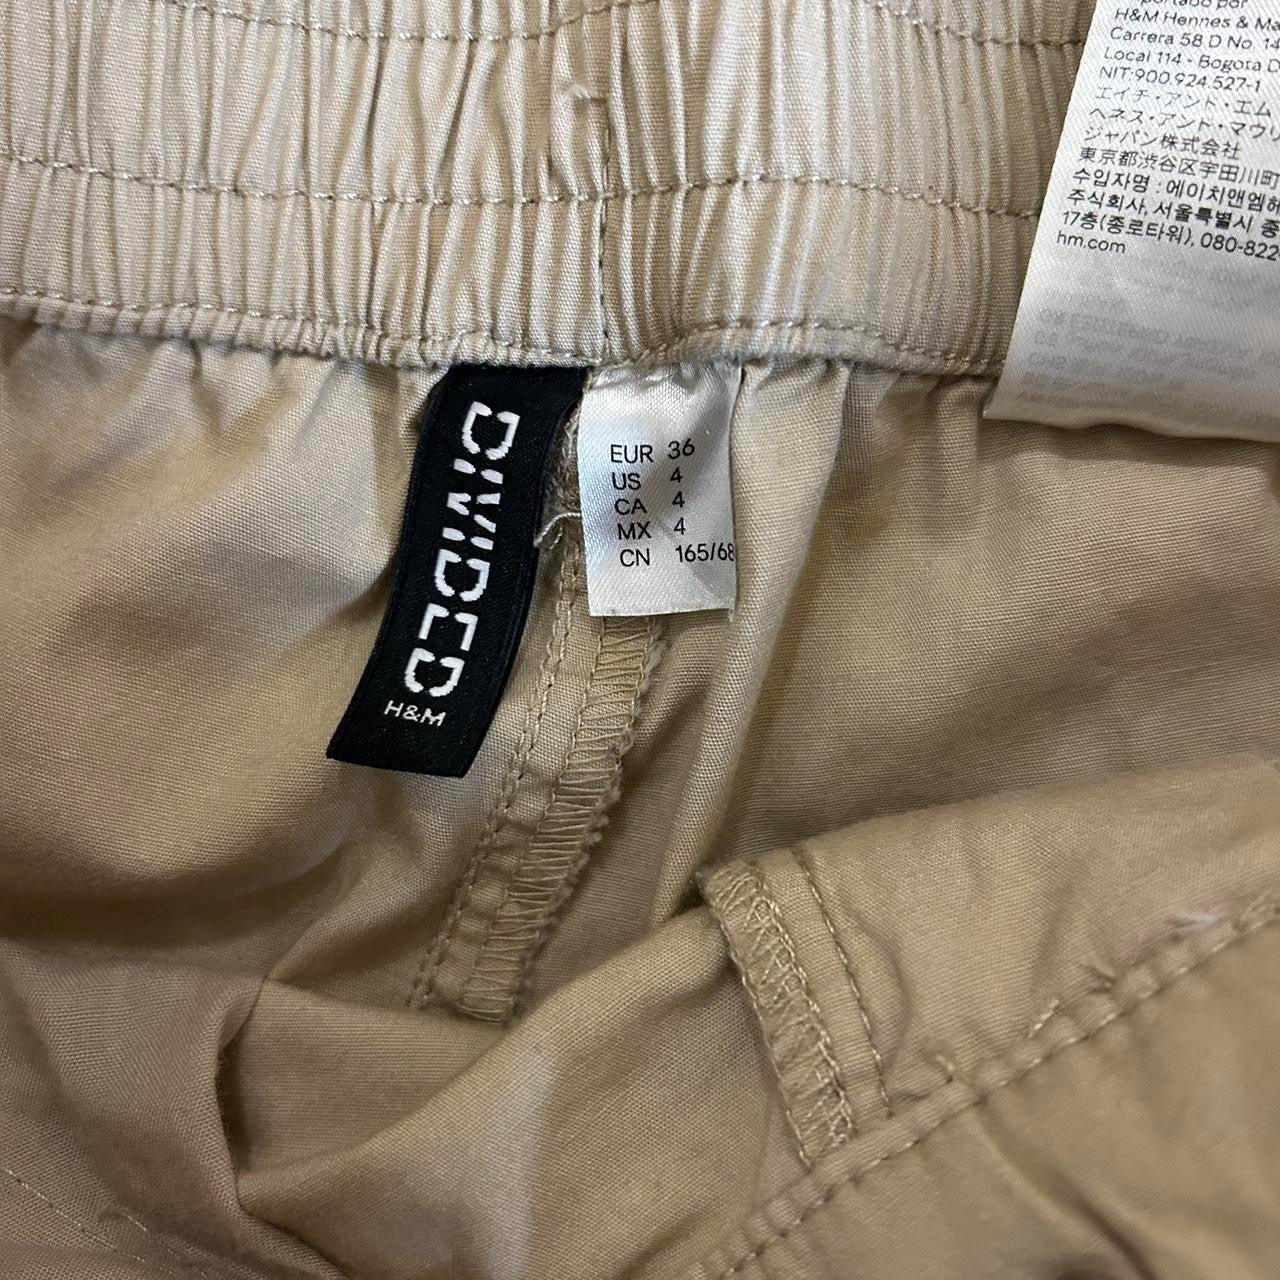 H&M Women’s Tan and Cream Trousers